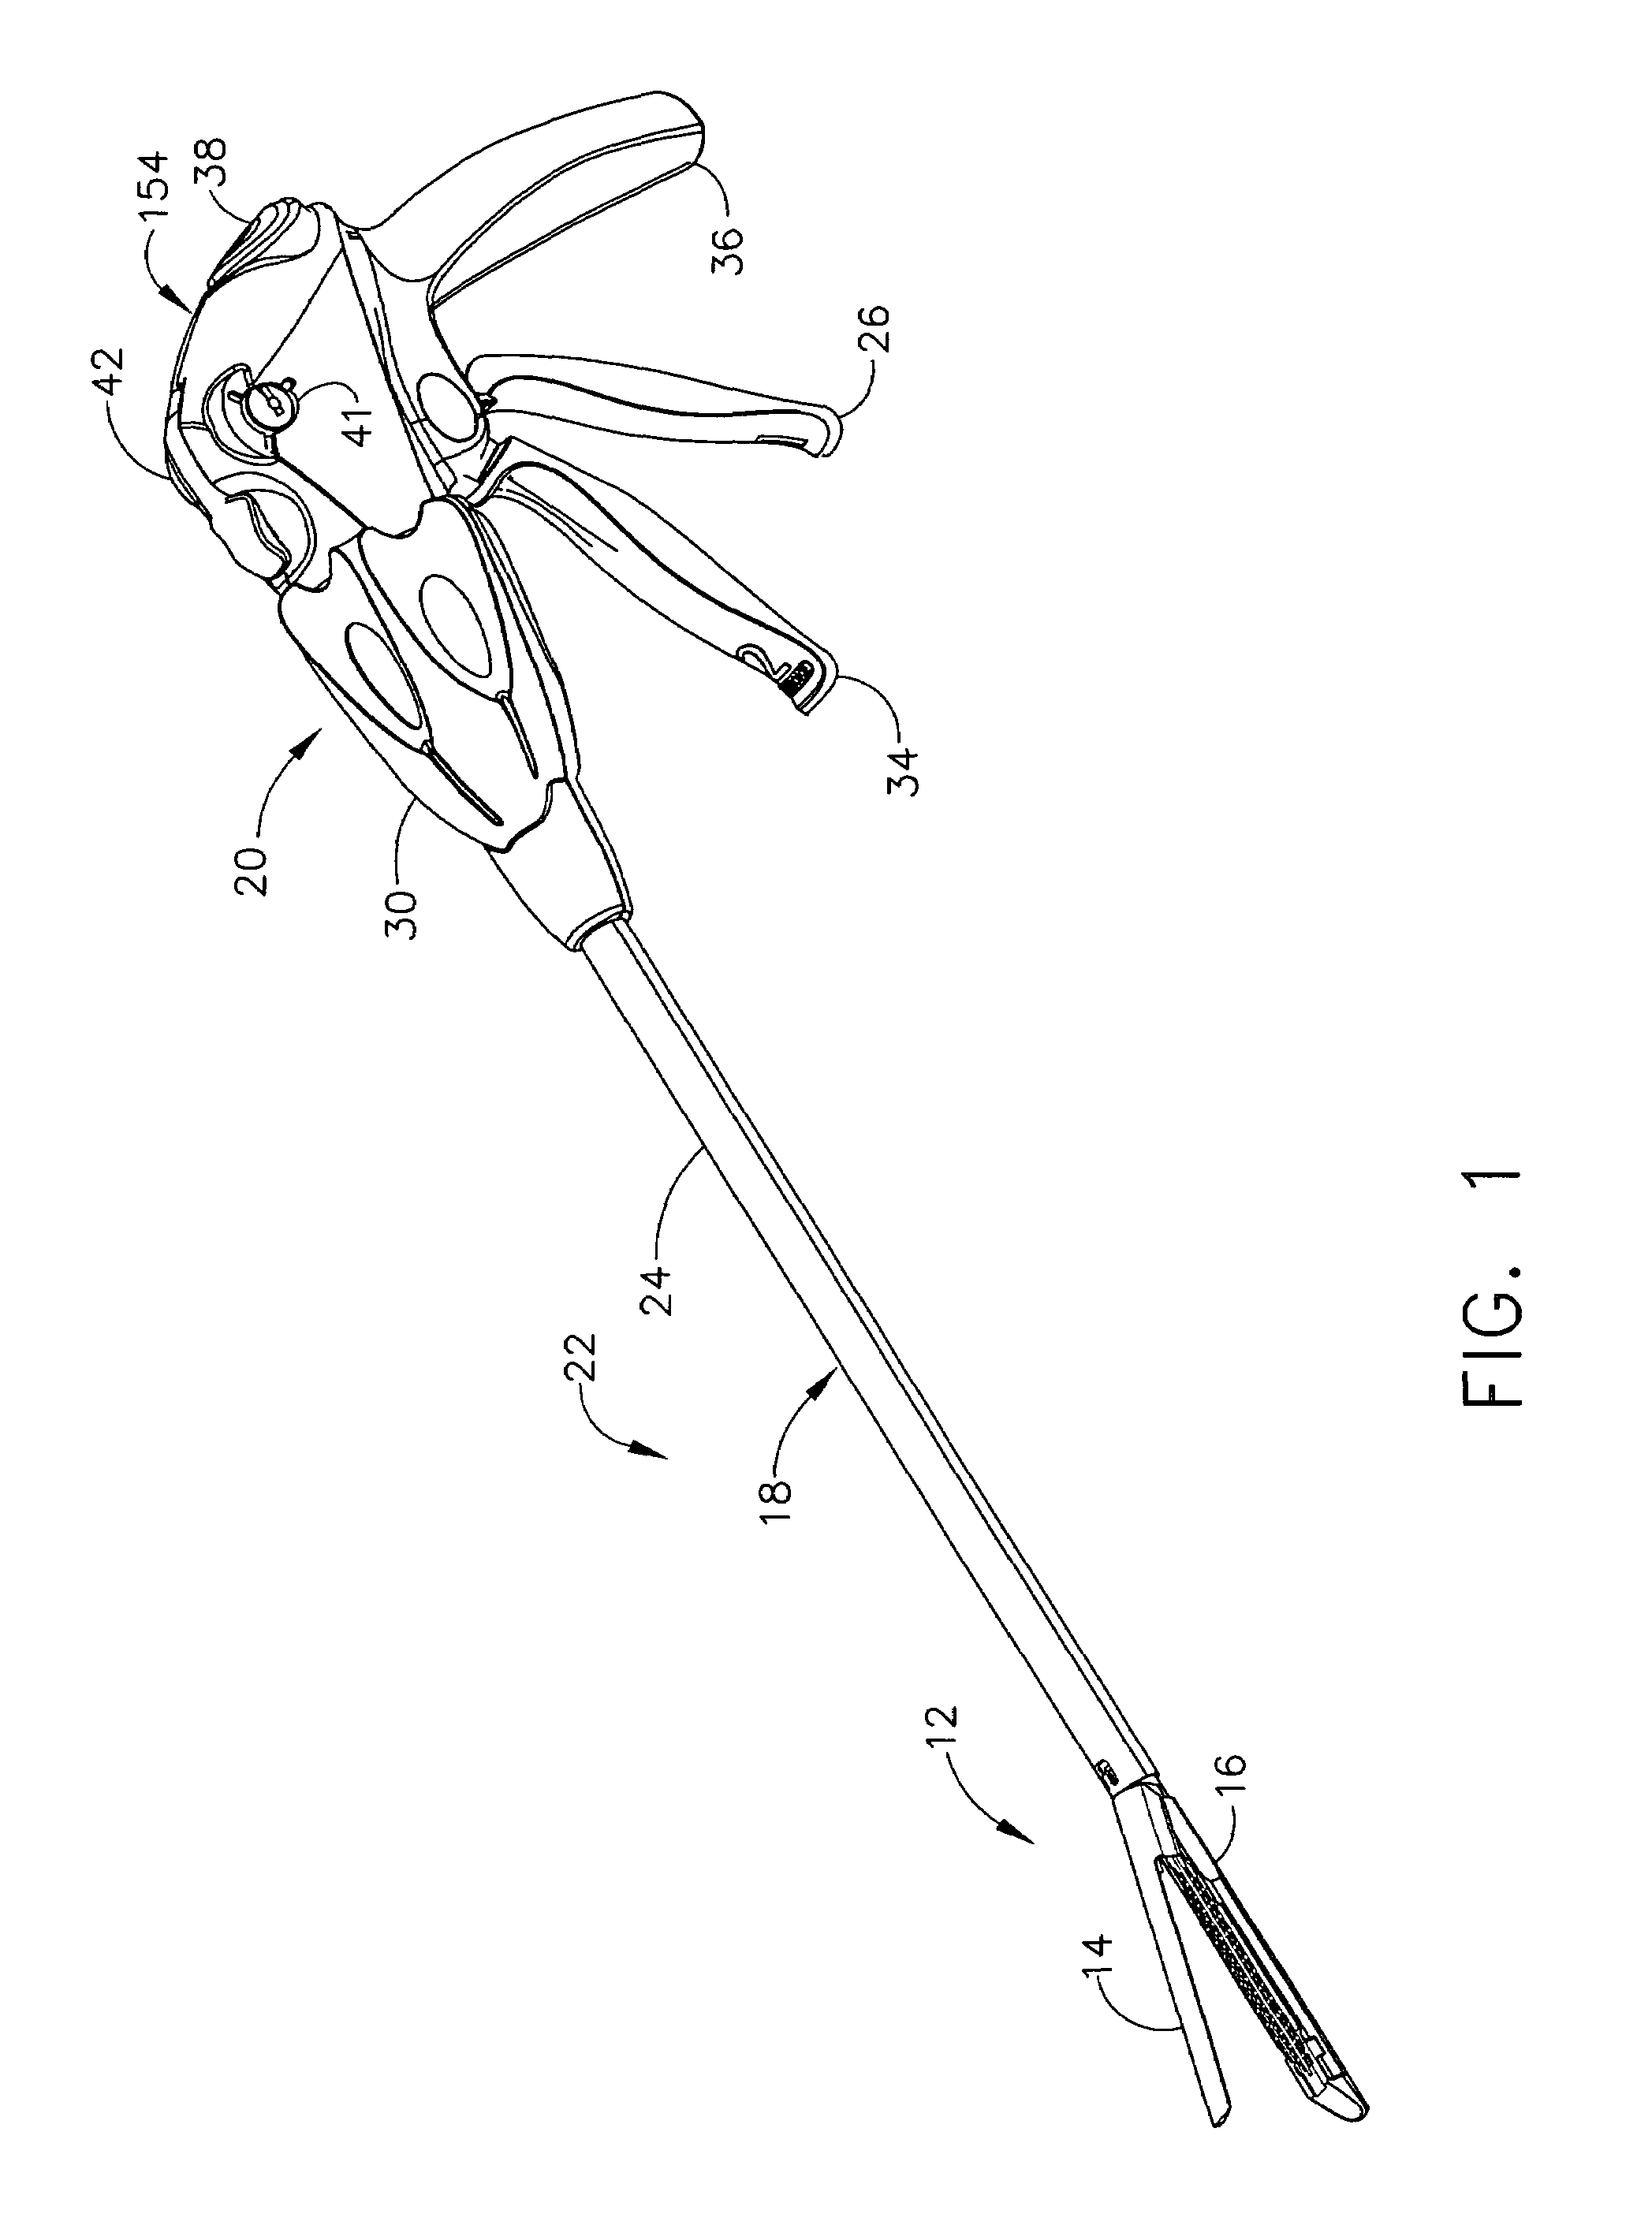 Surgical instrument incorporating EAP complete firing system lockout mechanism